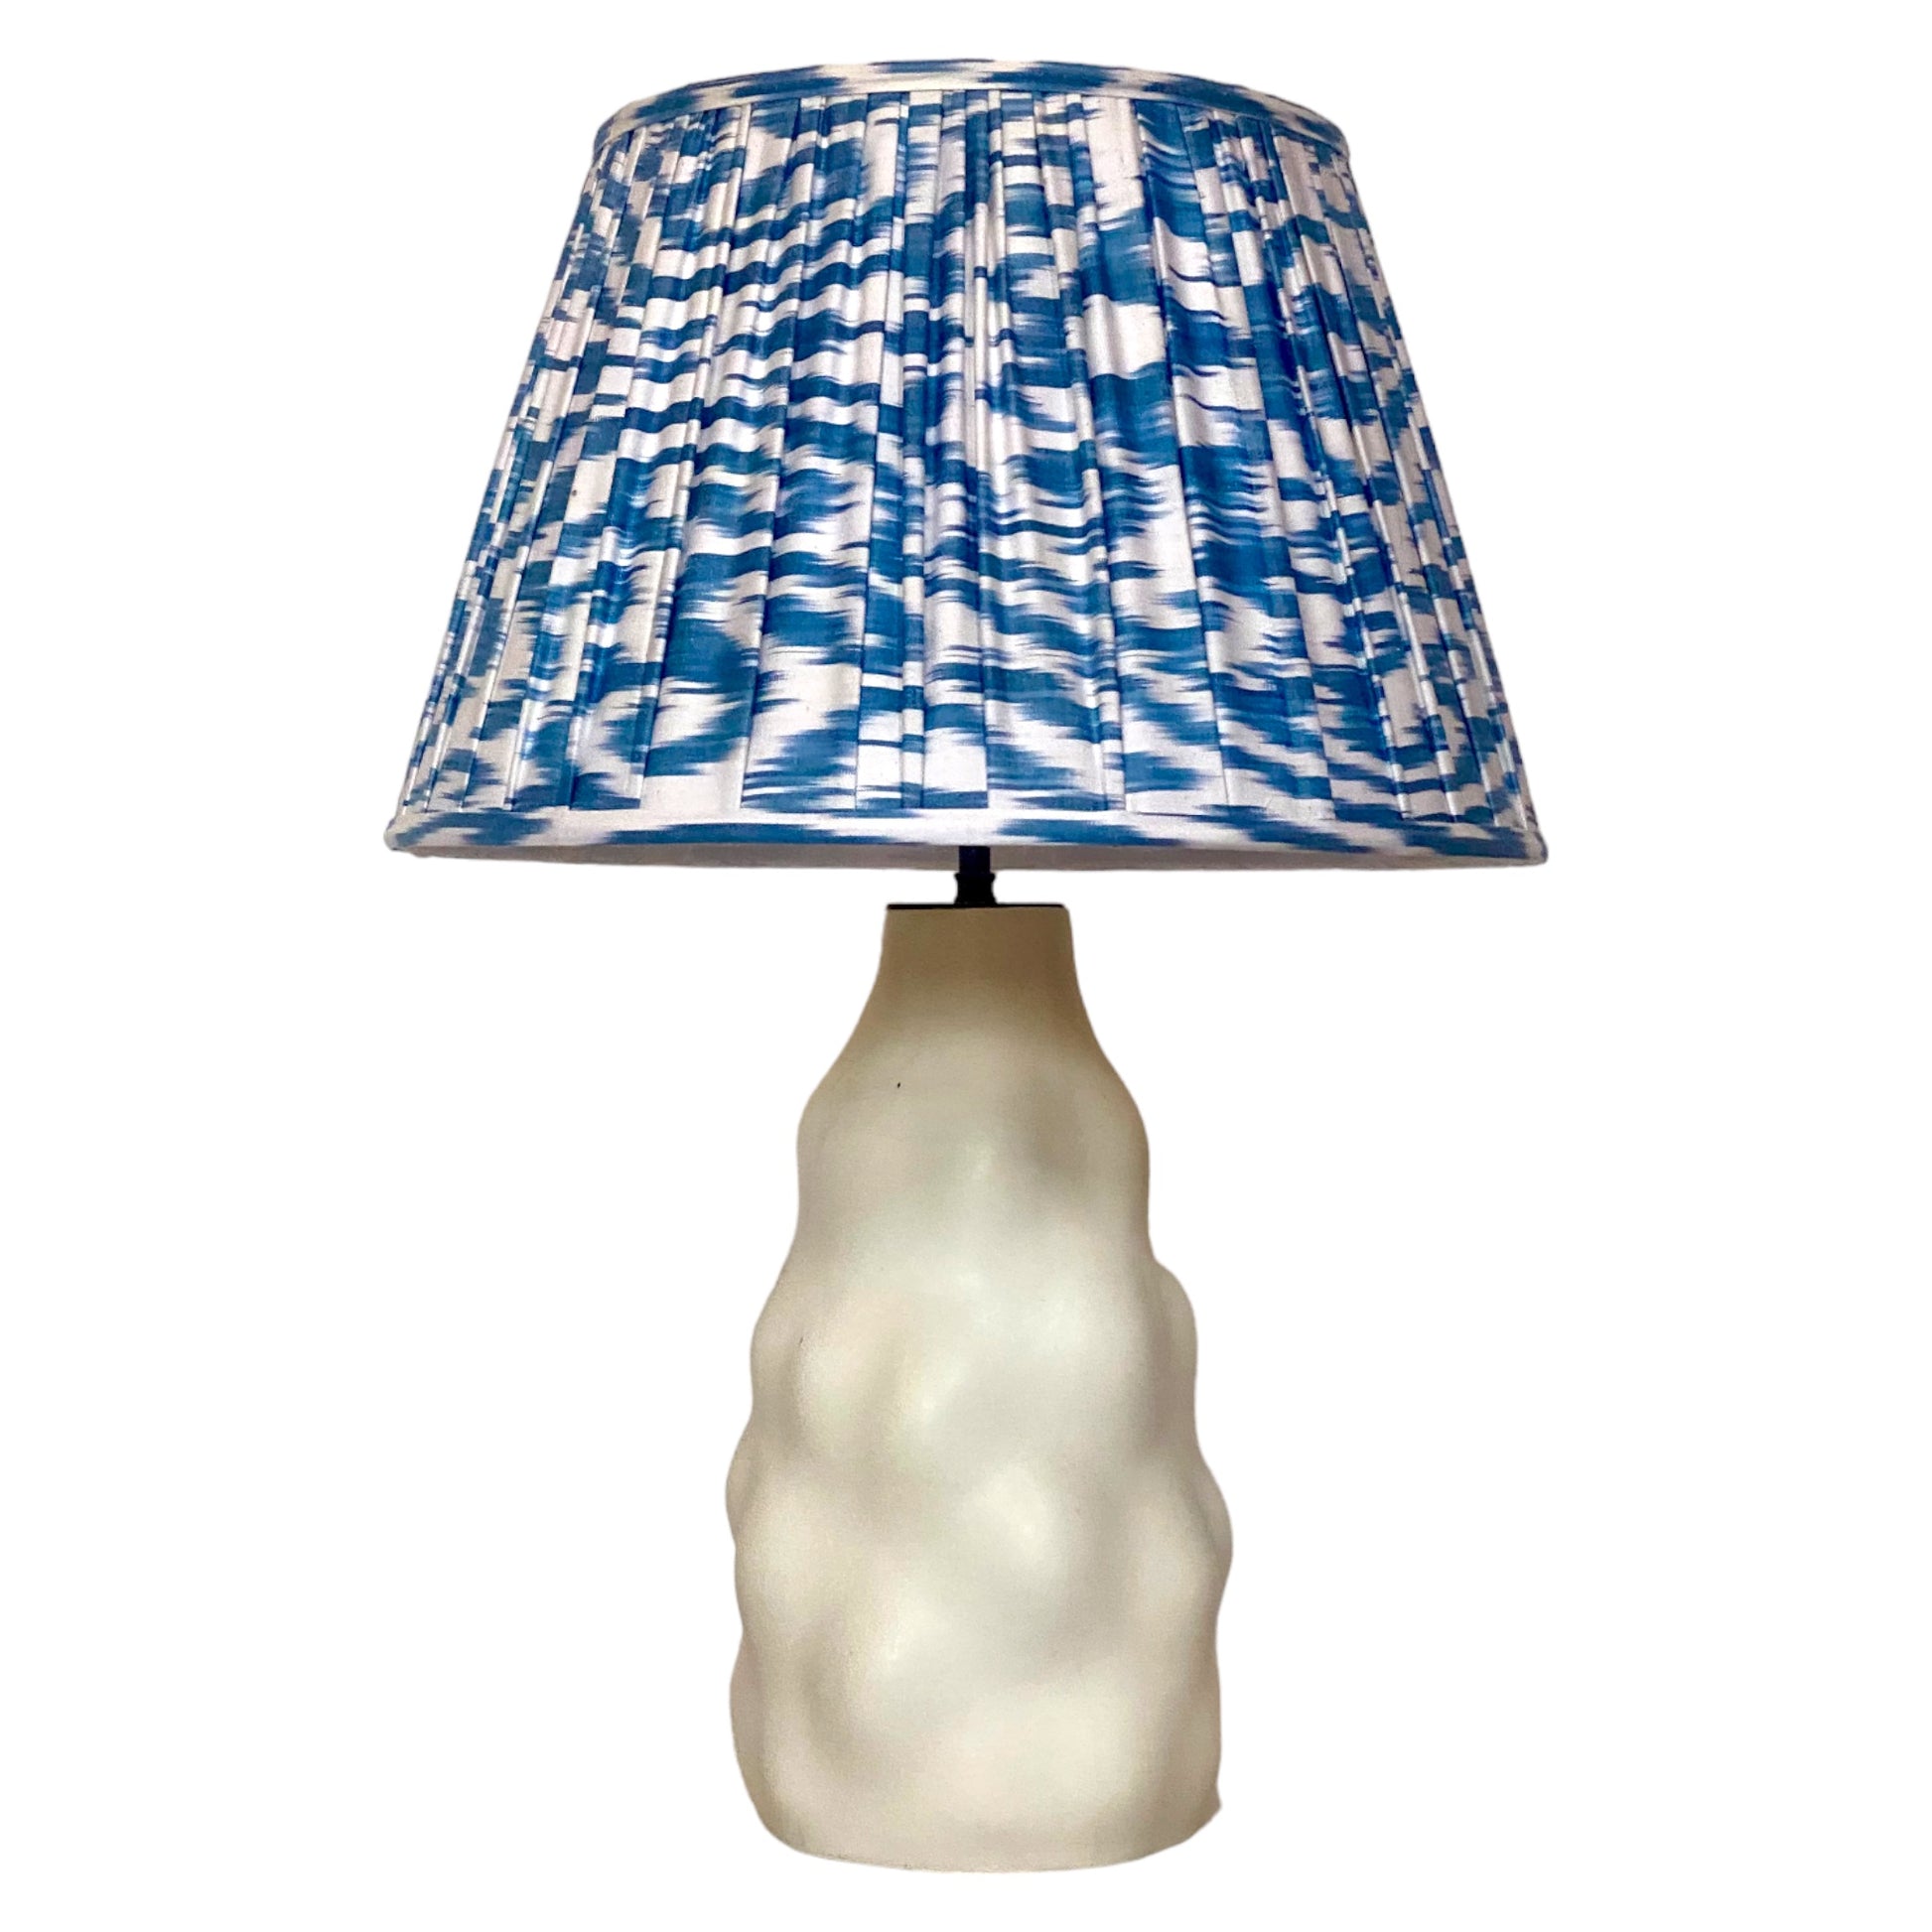 Blue and white ikat lampshade on IKI lamp